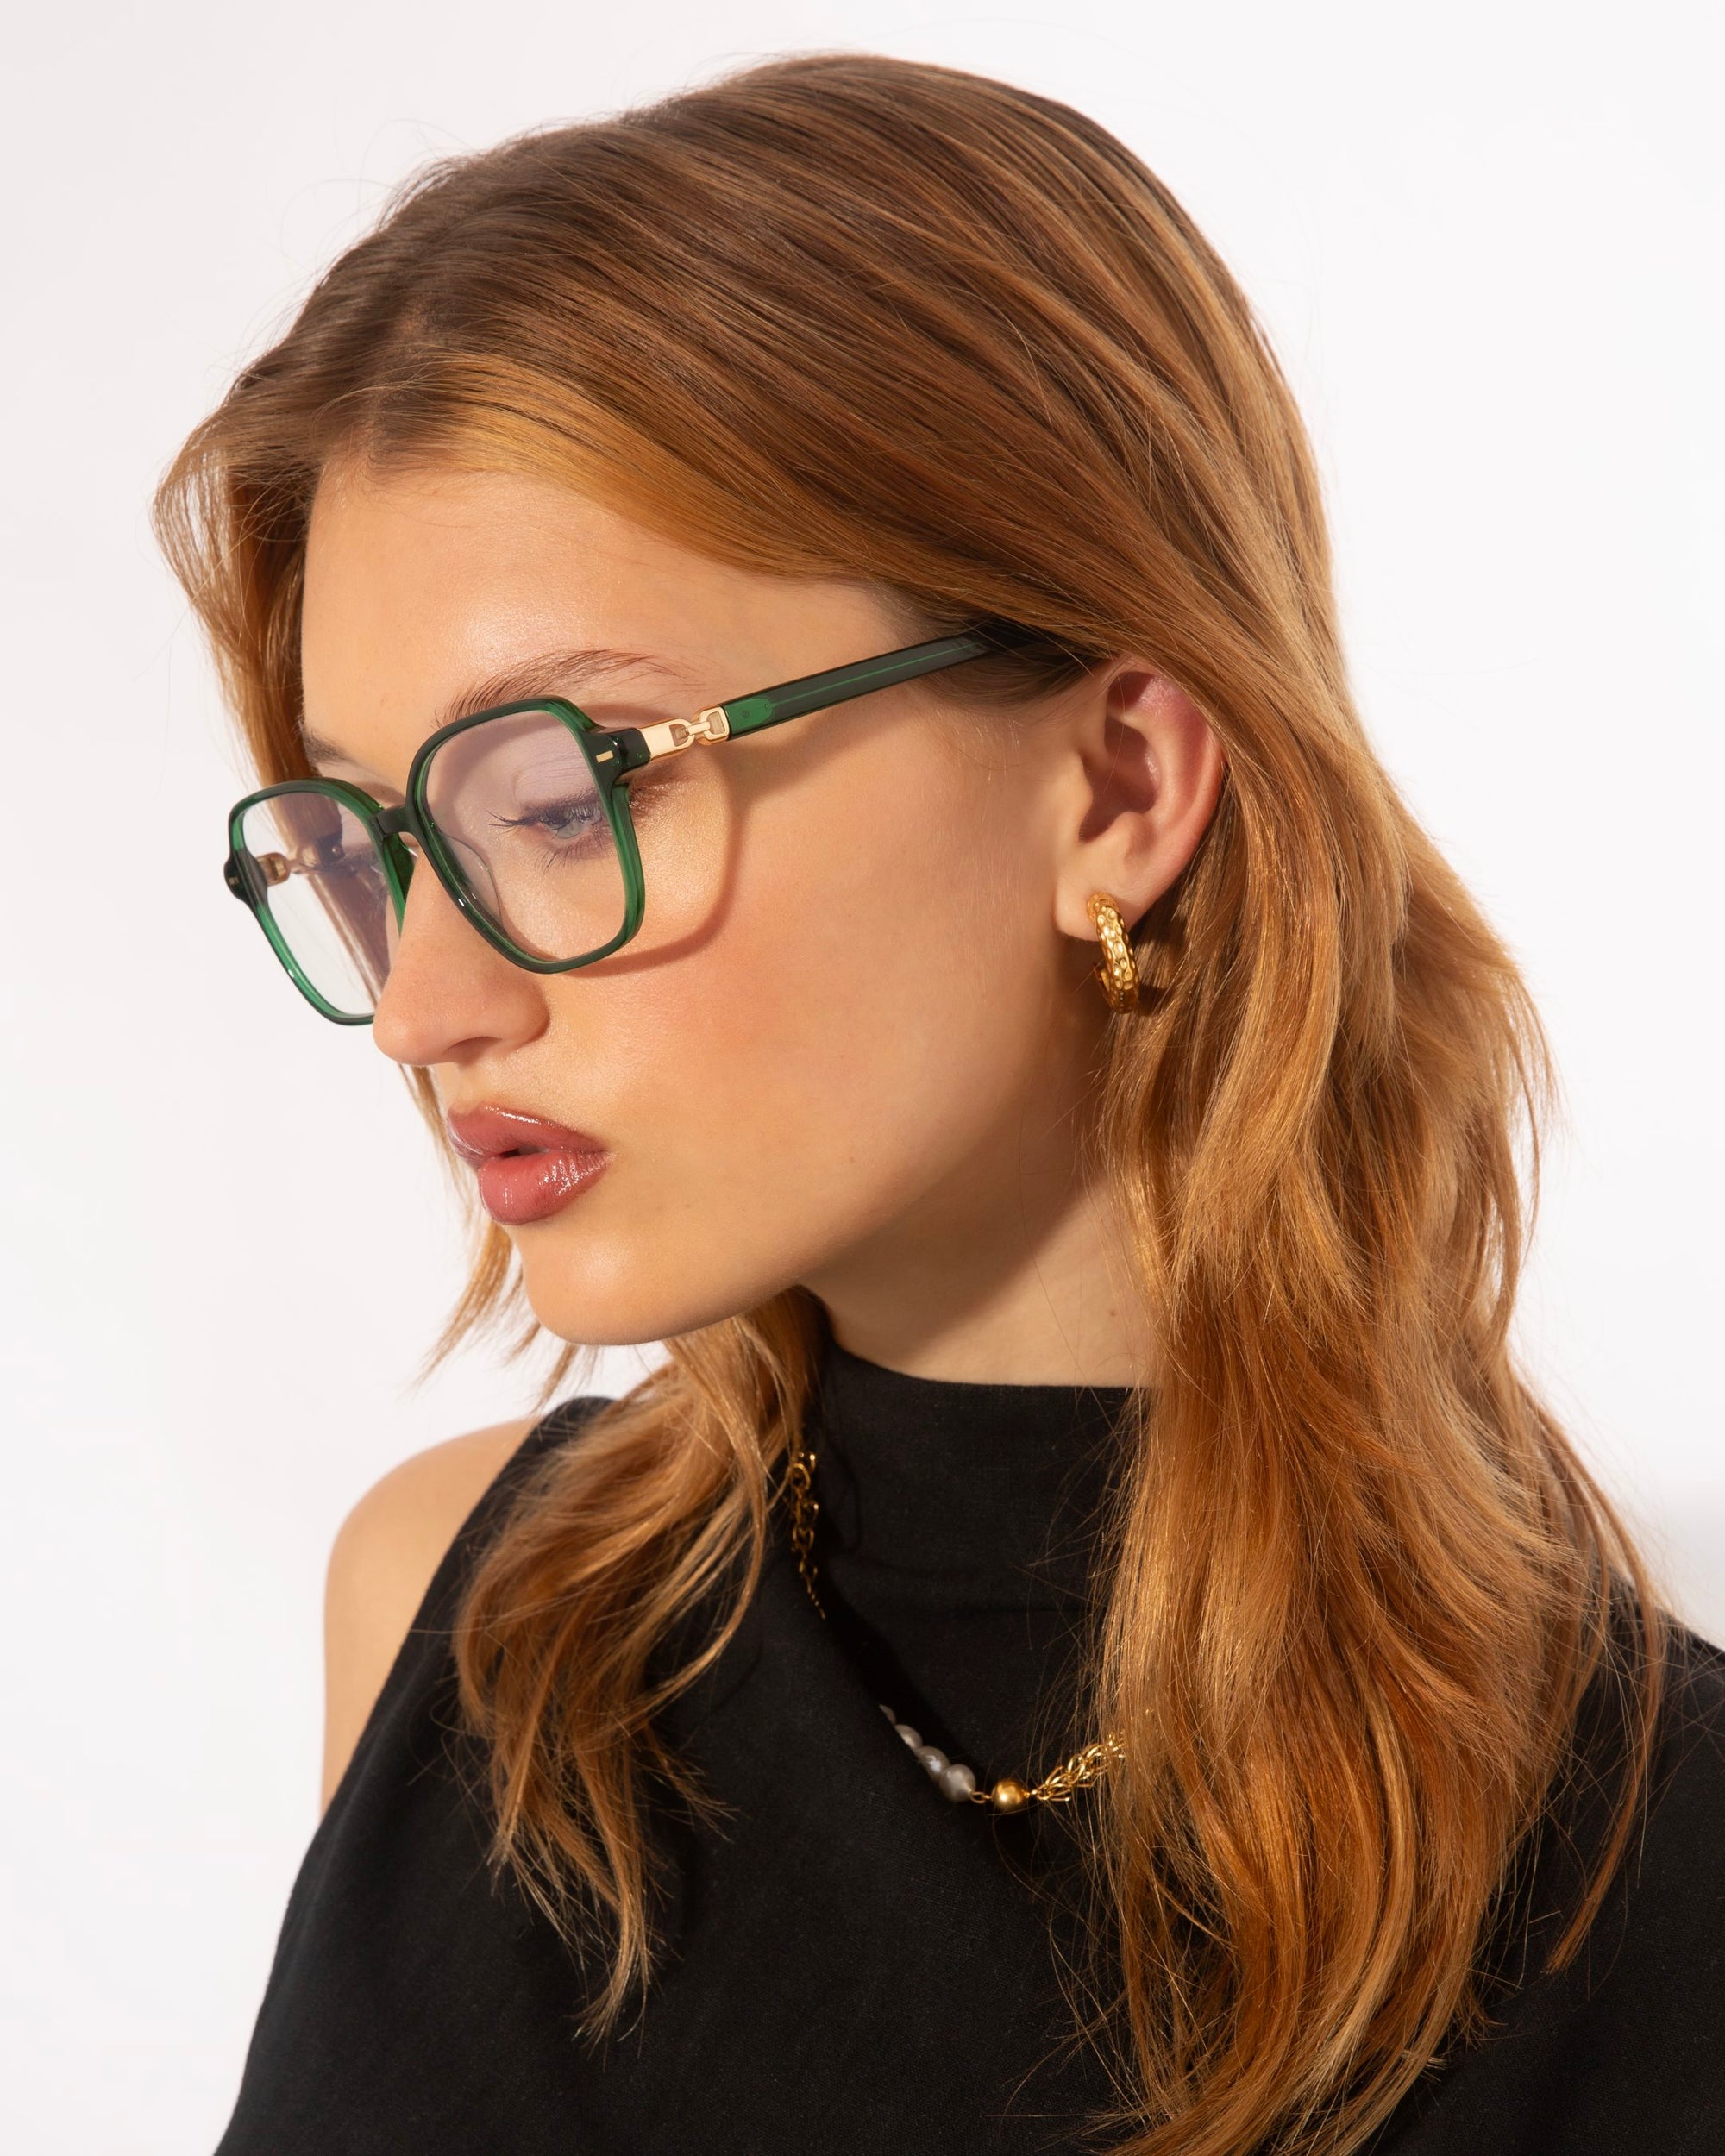 A woman with long, red hair is shown in a profile view against a plain background. She is wearing green-framed Charm glasses by For Art's Sake®, gold hoop earrings, and a black sleeveless top. Her serious expression is accentuated by her slightly parted lips.